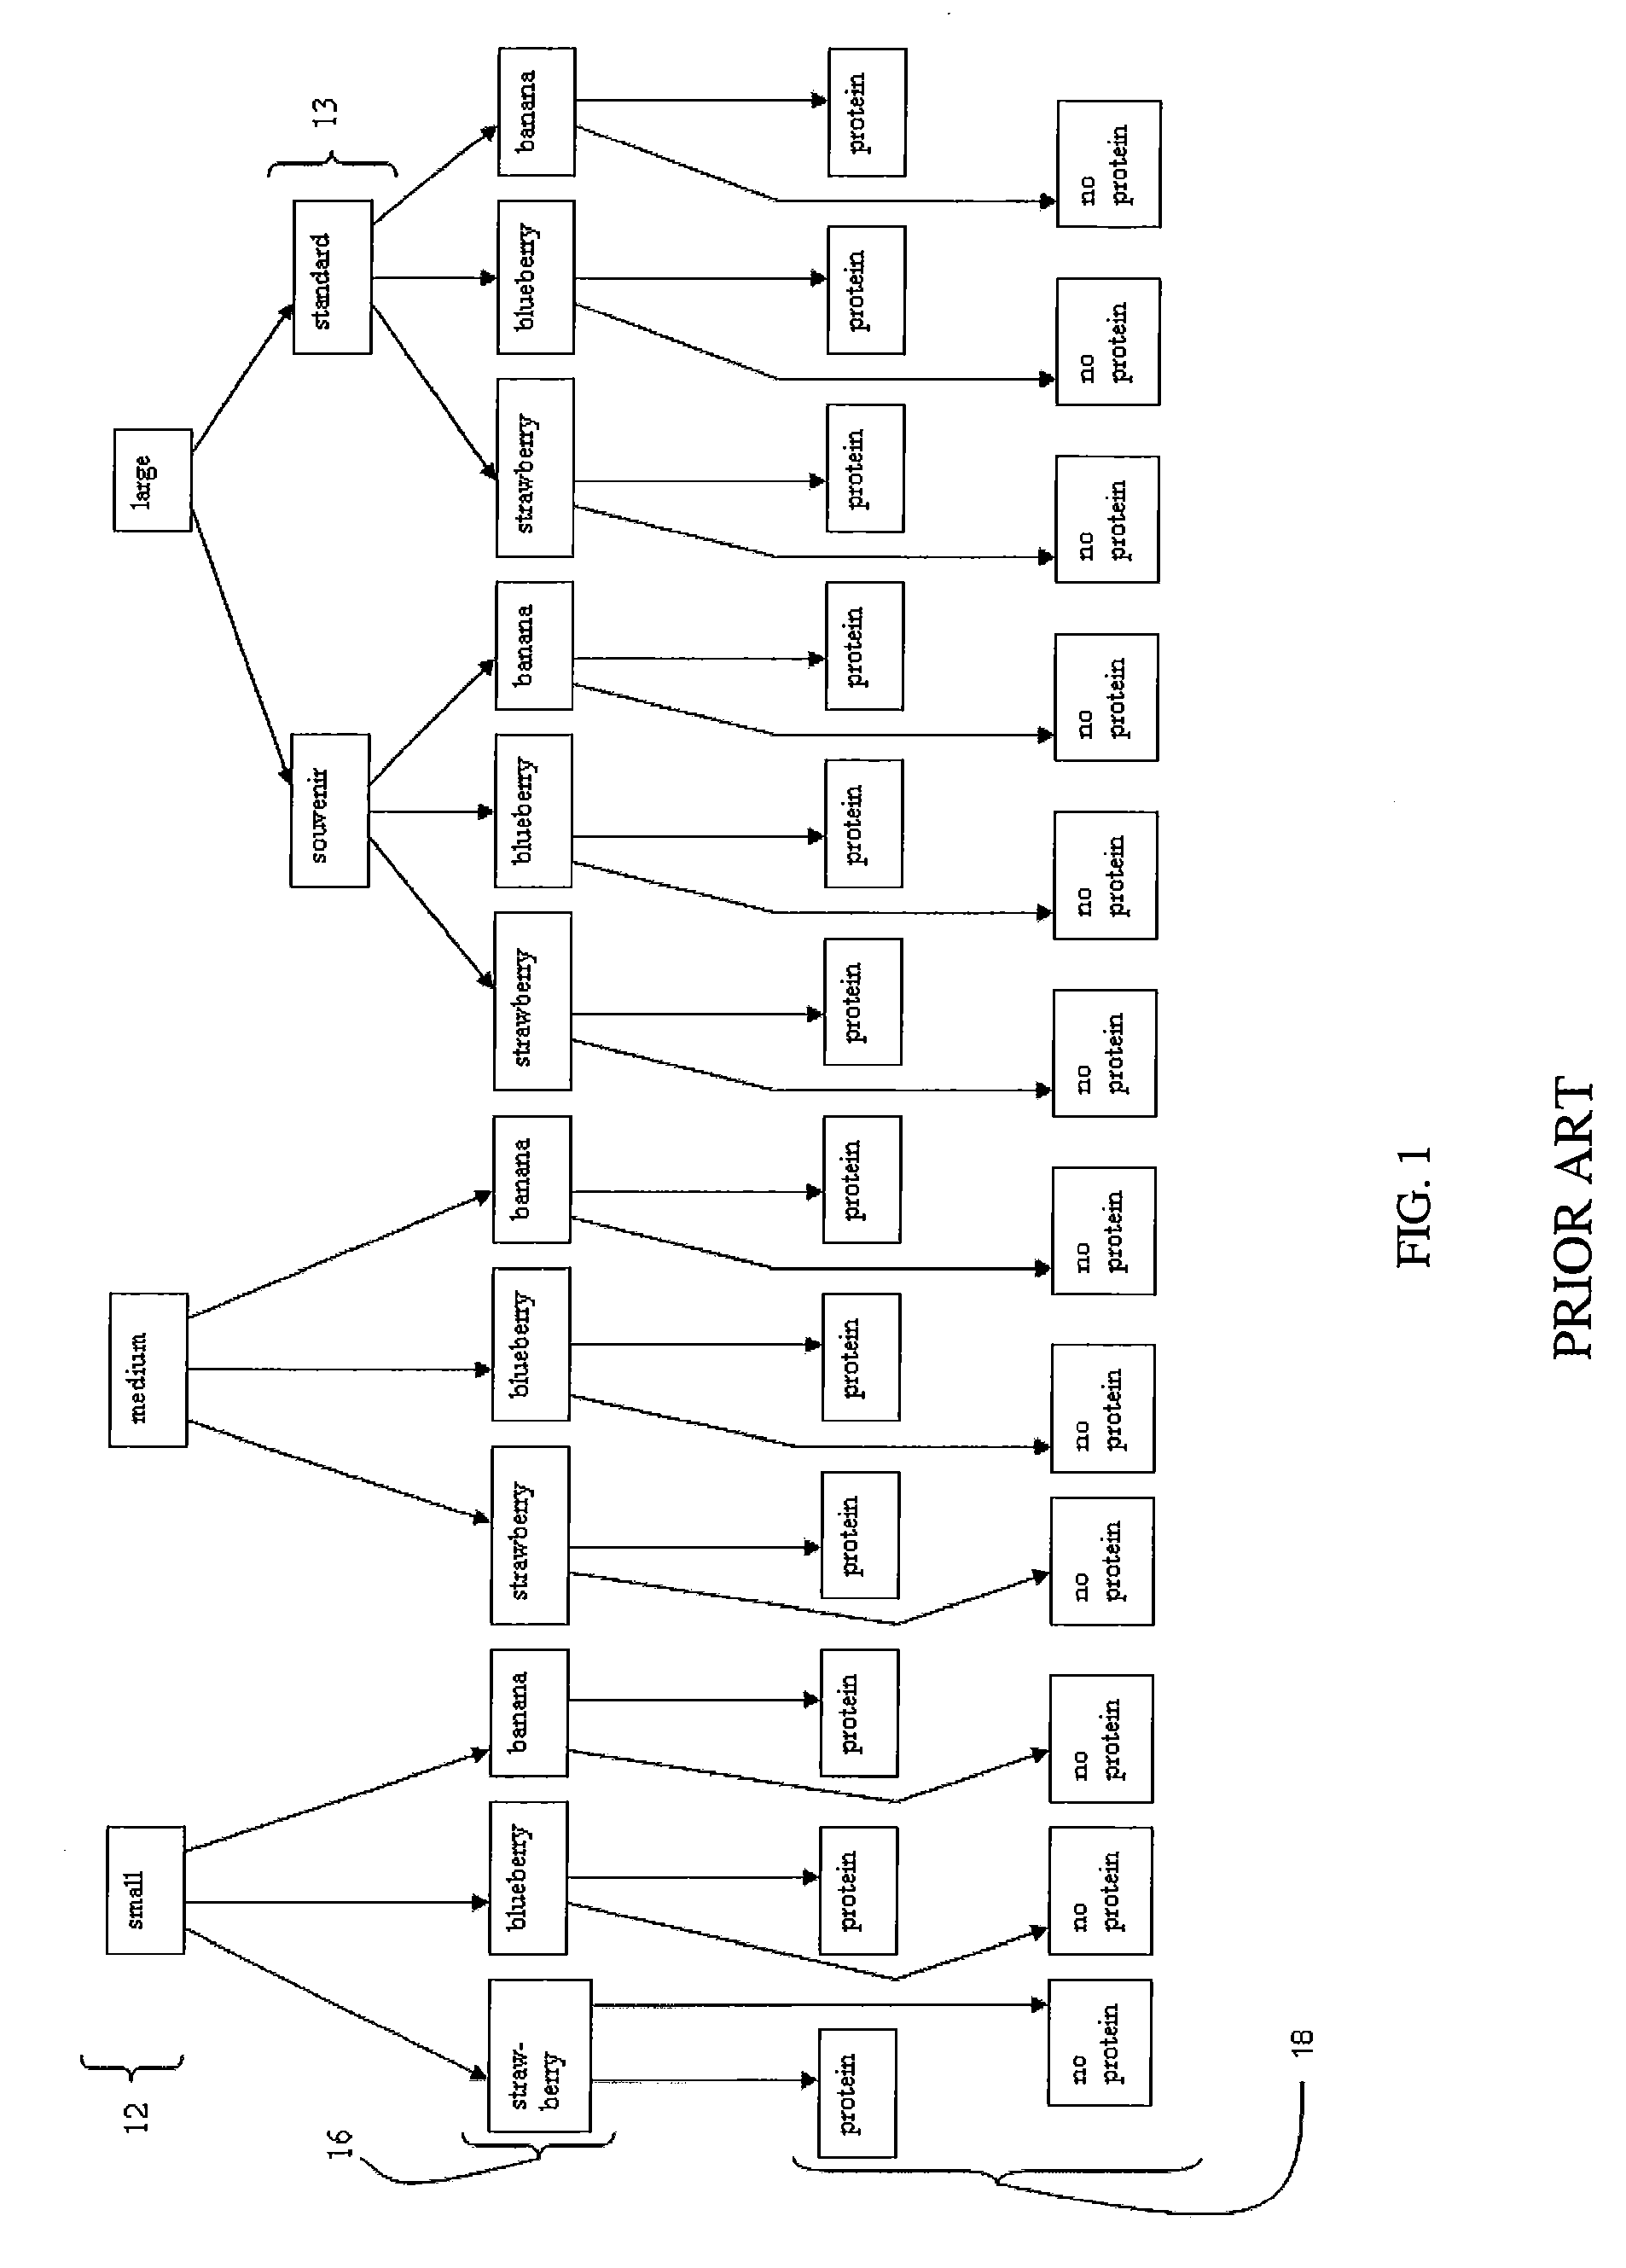 System and method for modeling and analyzing complex scenarios